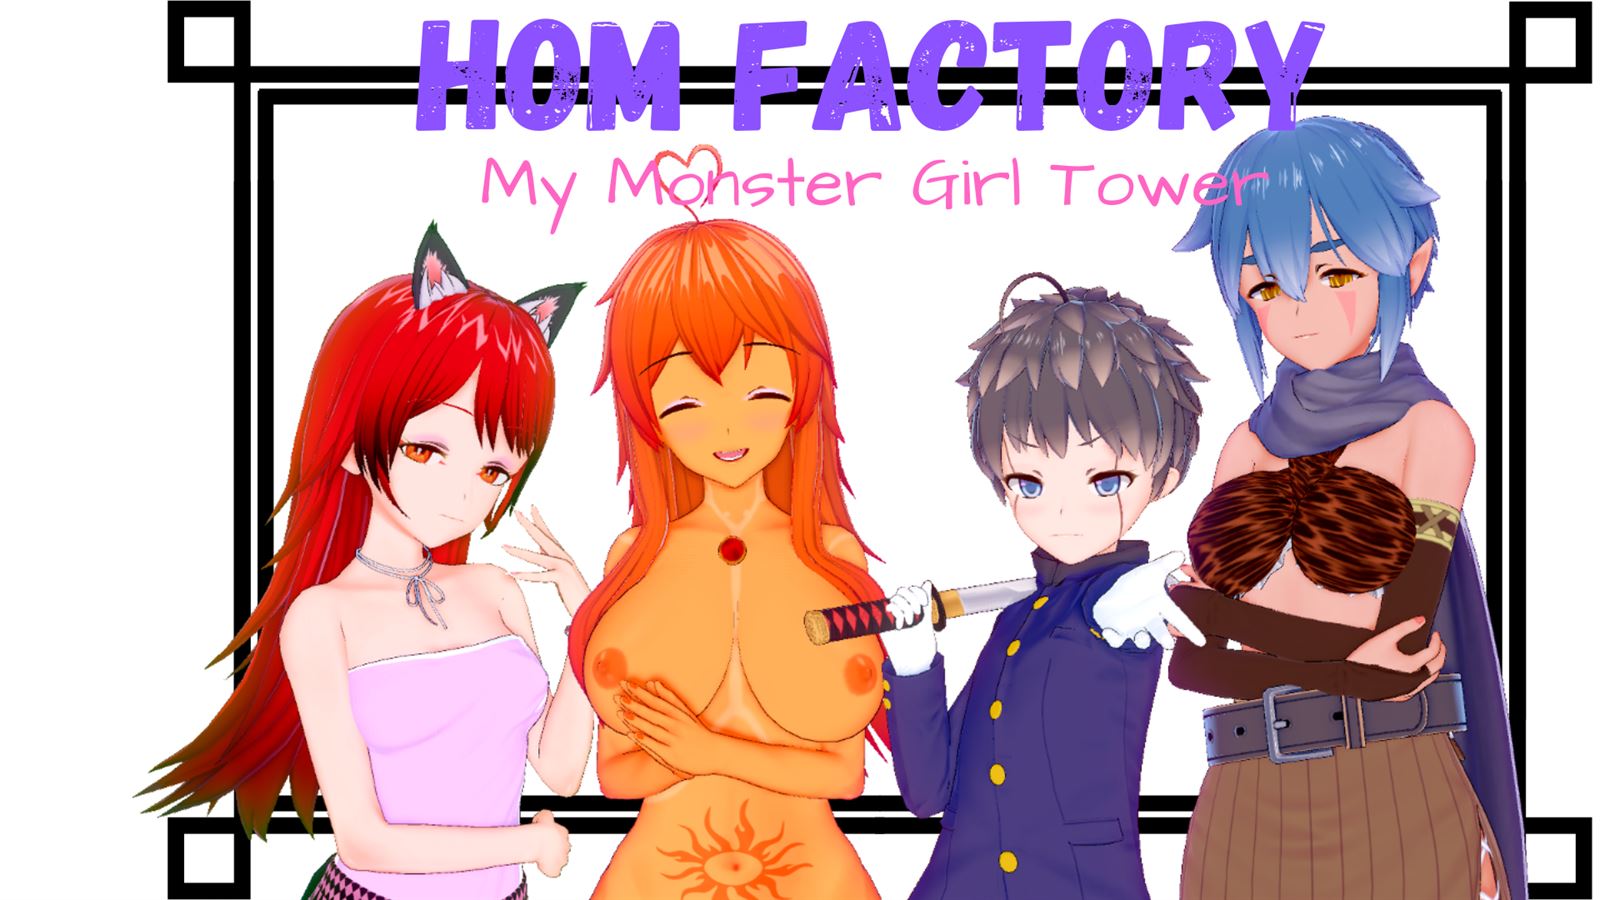 Tower Girls Porn - Hom Factory: My Monster Girl Tower Ren'py Porn Sex Game v.3.0.1 Download  for Windows, MacOS, Linux, Android